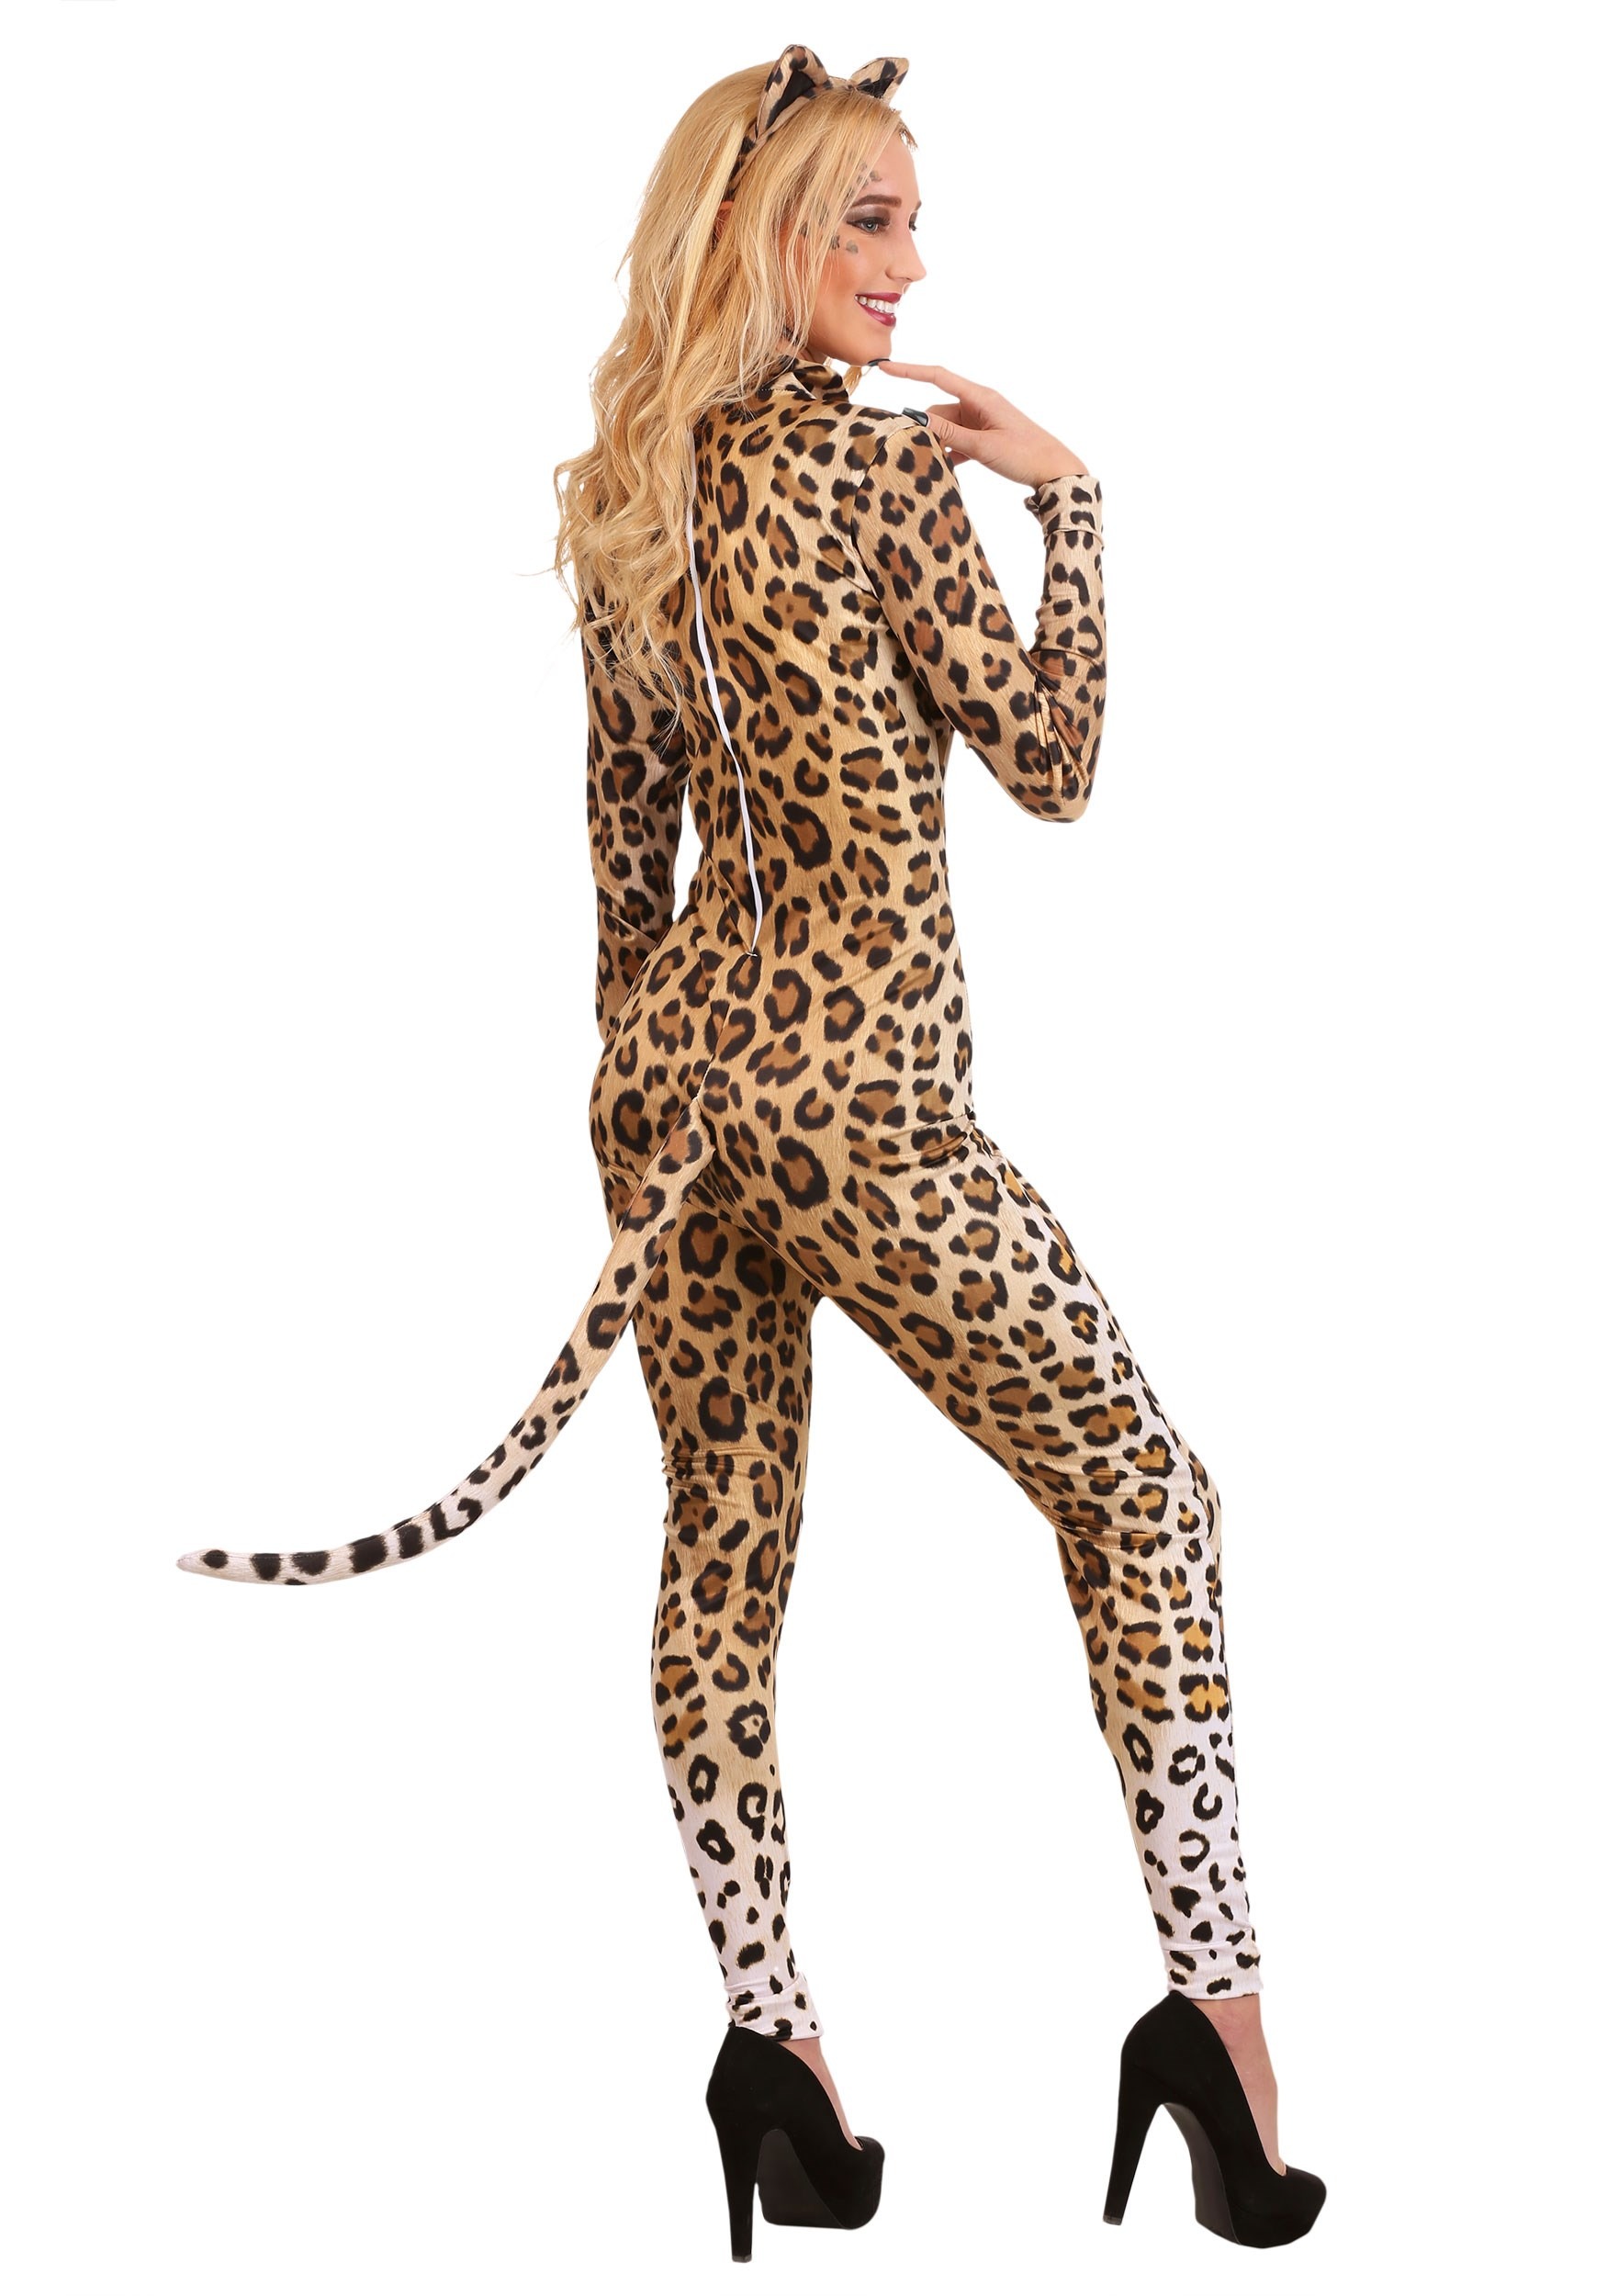 Womens Catsuit Leopard Print Sexy Fancy Dress Adult Animal Costume